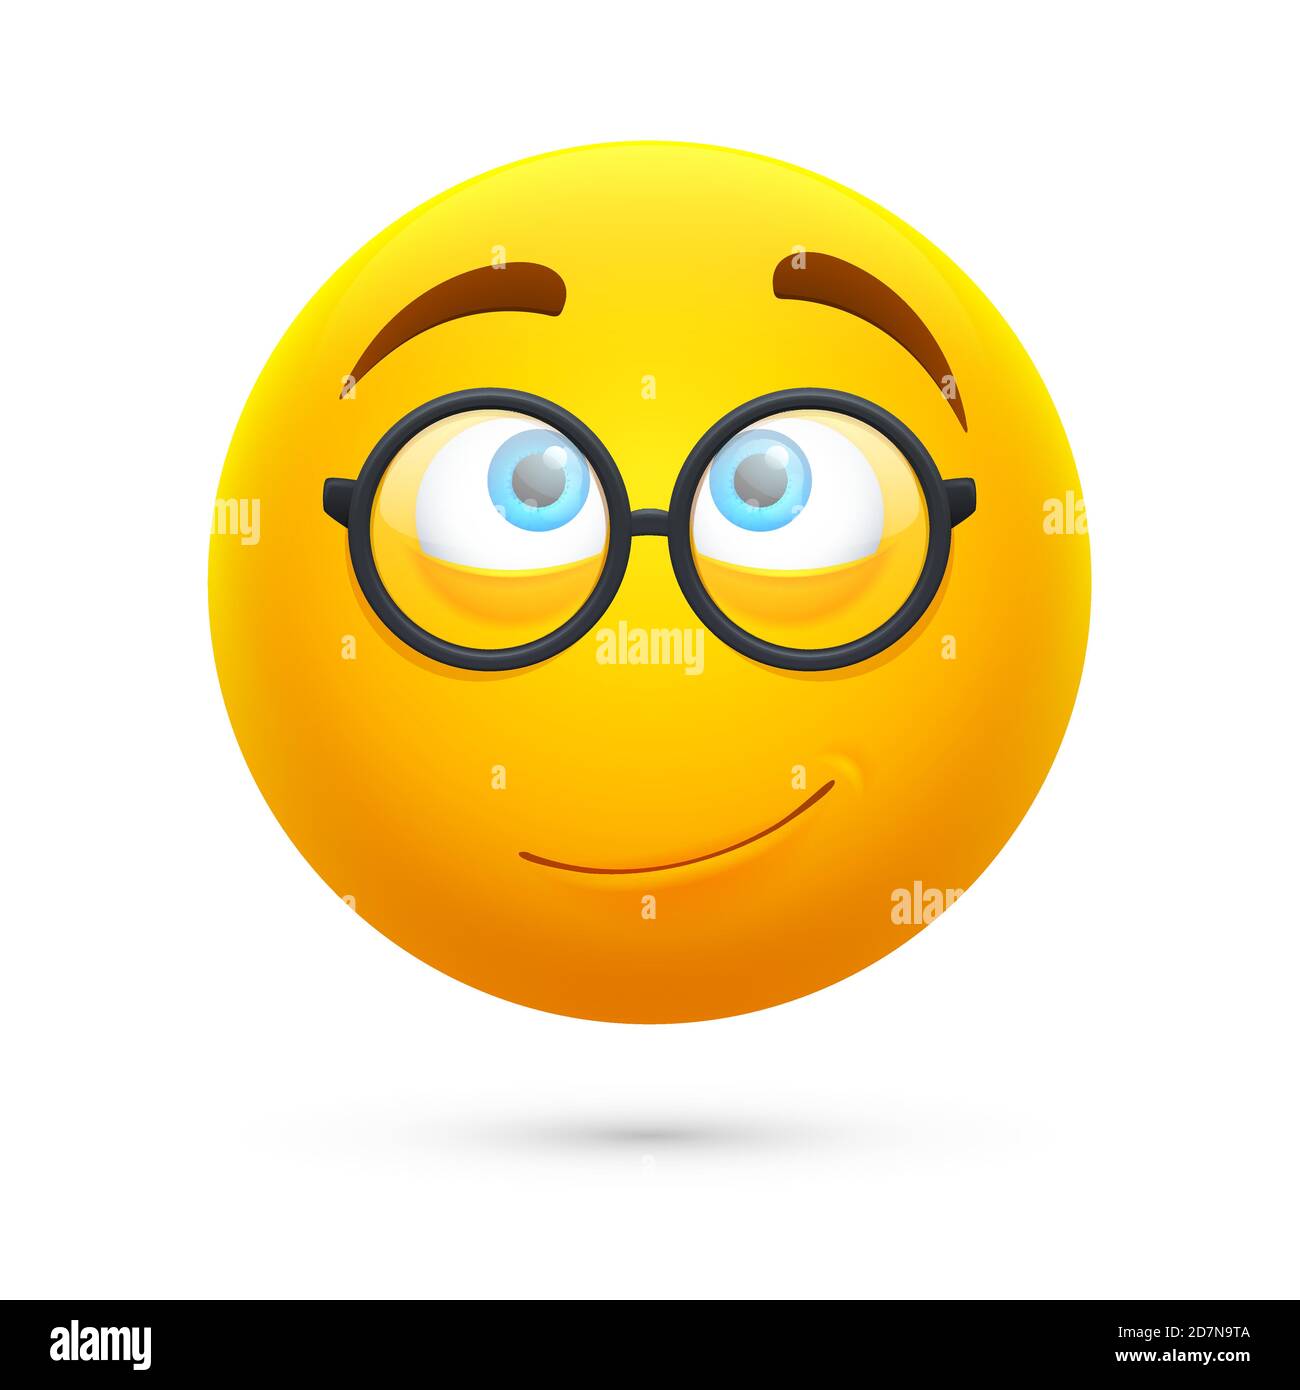 Cartoon yellow 3d smiley face. Cute geek vector emoji isolated on white background. Illustration of geek and nerd emoji expression Stock Vector